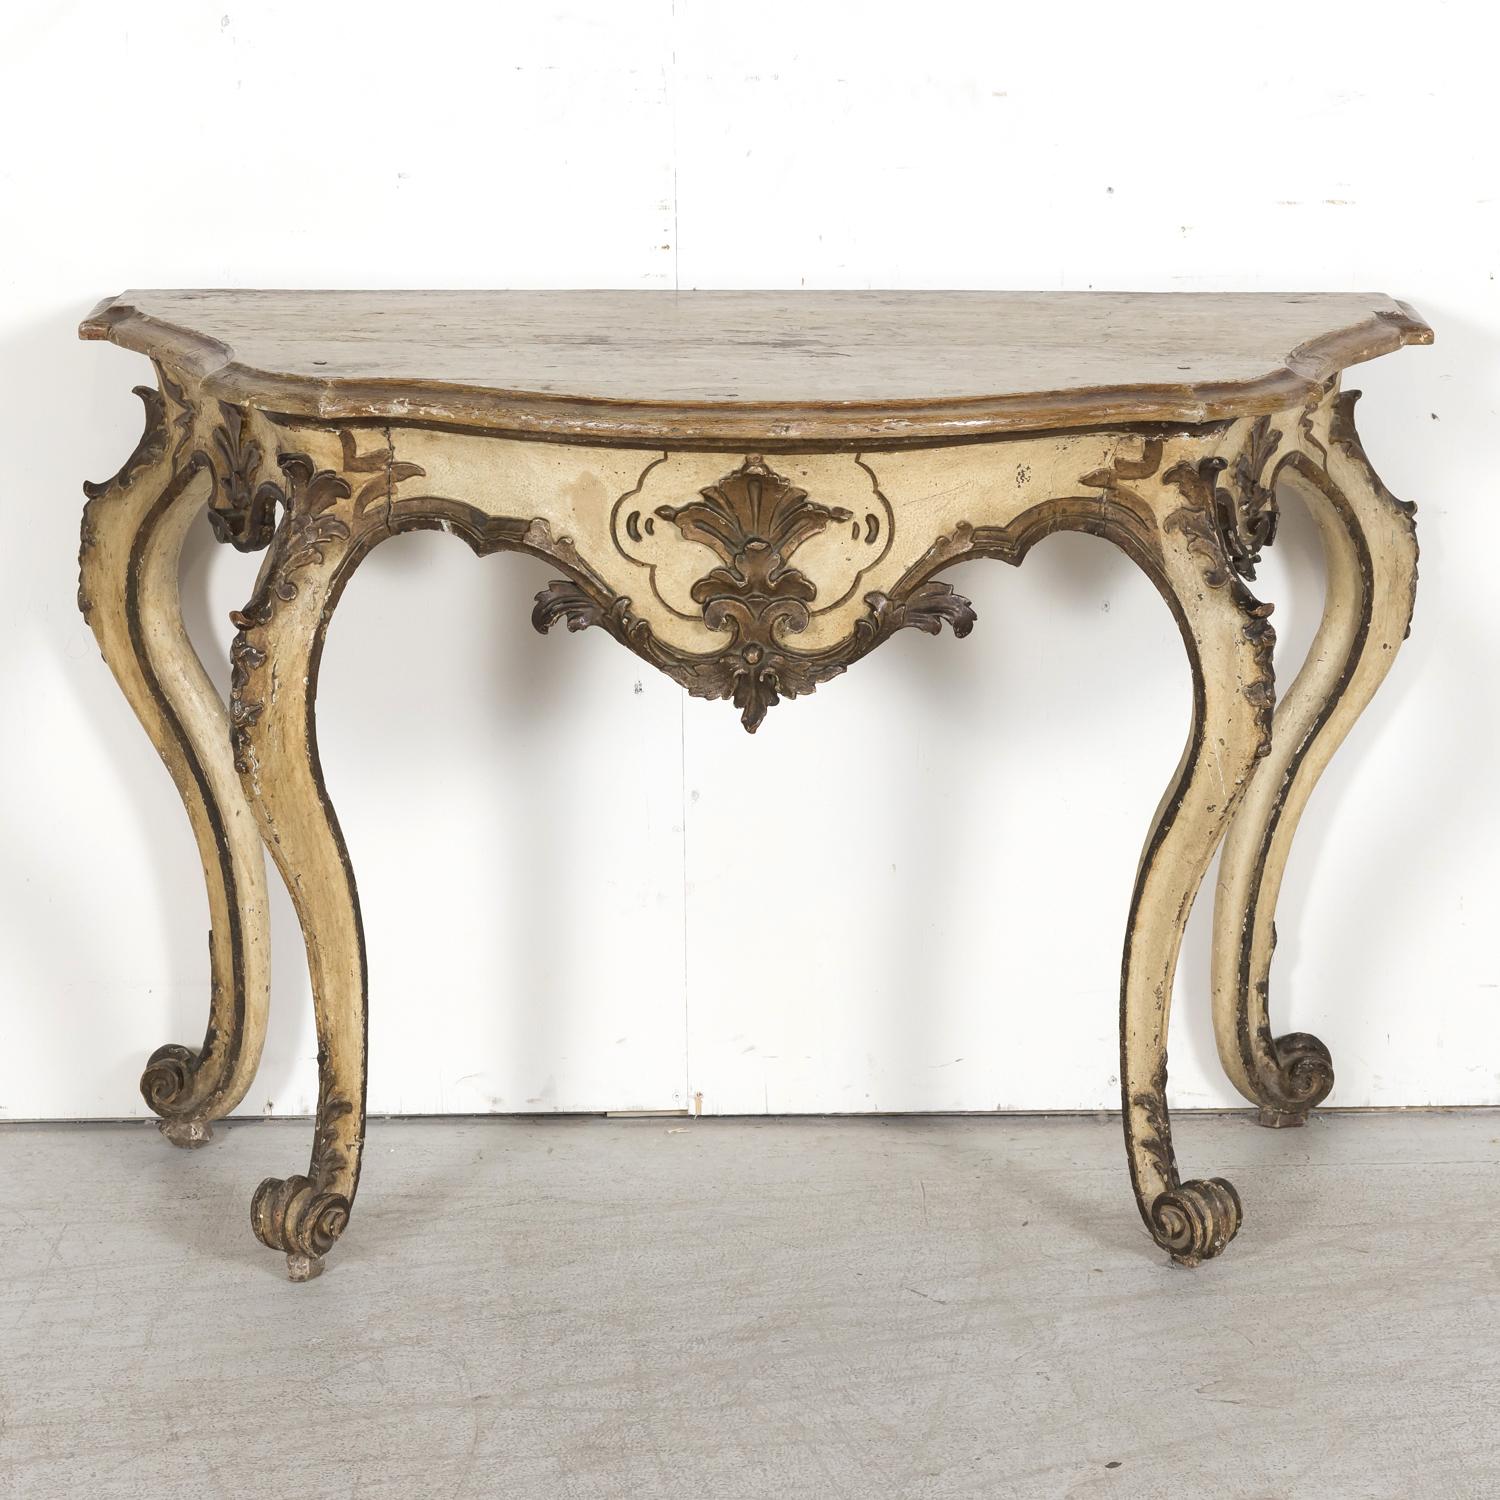 An elegant 19th century Italian Rococo style hand carved polychrome painted and parcel giltwood console table, circa 1850s. Handcrafted in Tuscany, this beautiful antique wall console features a serpentine top with beveled edge above a frieze carved